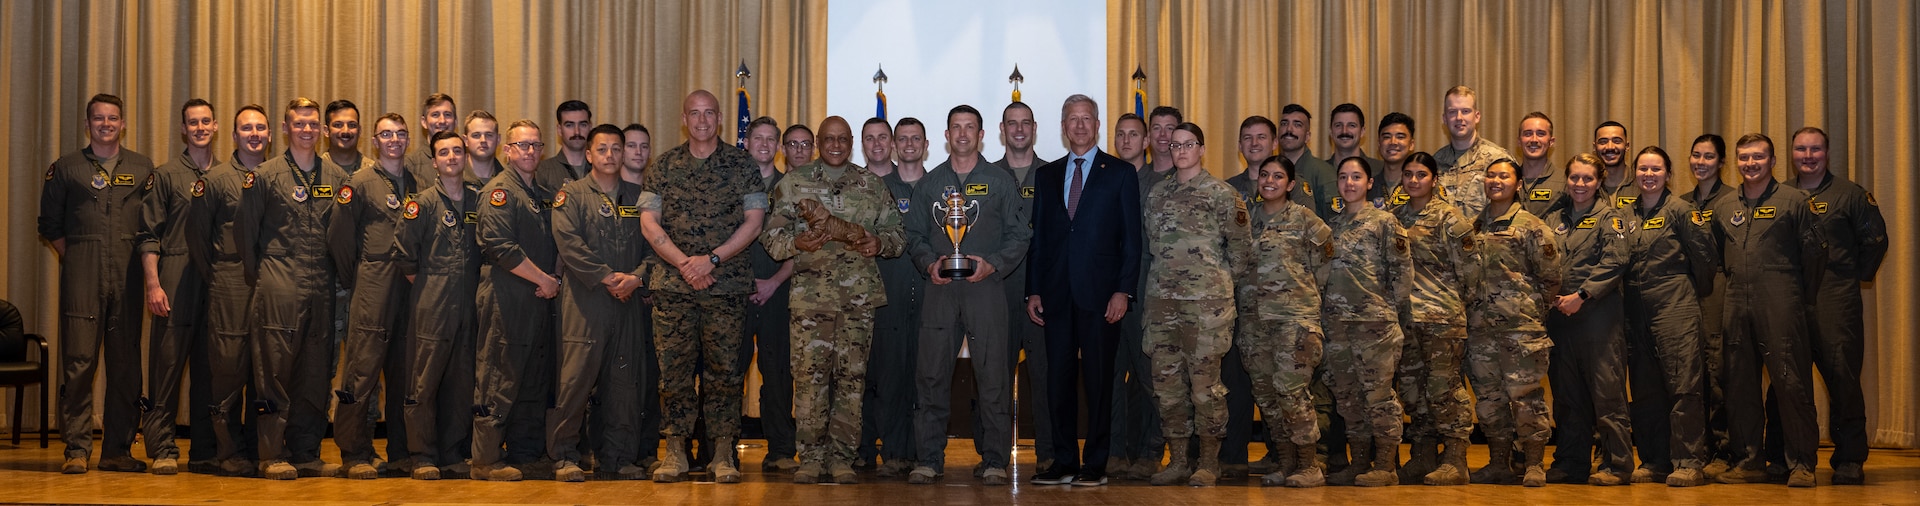 Gen. Anthony Cotton, United States Strategic Command commander, and Mr. Lance Fritz, Strategic Command Consultation Committee member, pose for a photo with the 37th Bomb Squadron after presenting the Omaha Trophy at Ellsworth Air Force Base, South Dakota, April 21, 2023. The 37th BS is one of the oldest squadrons in the United States Air Force and famously flew the Doolittle Raid in WWII.  (U.S. Air Force photo by Senior Airman Alexis M. Morris)